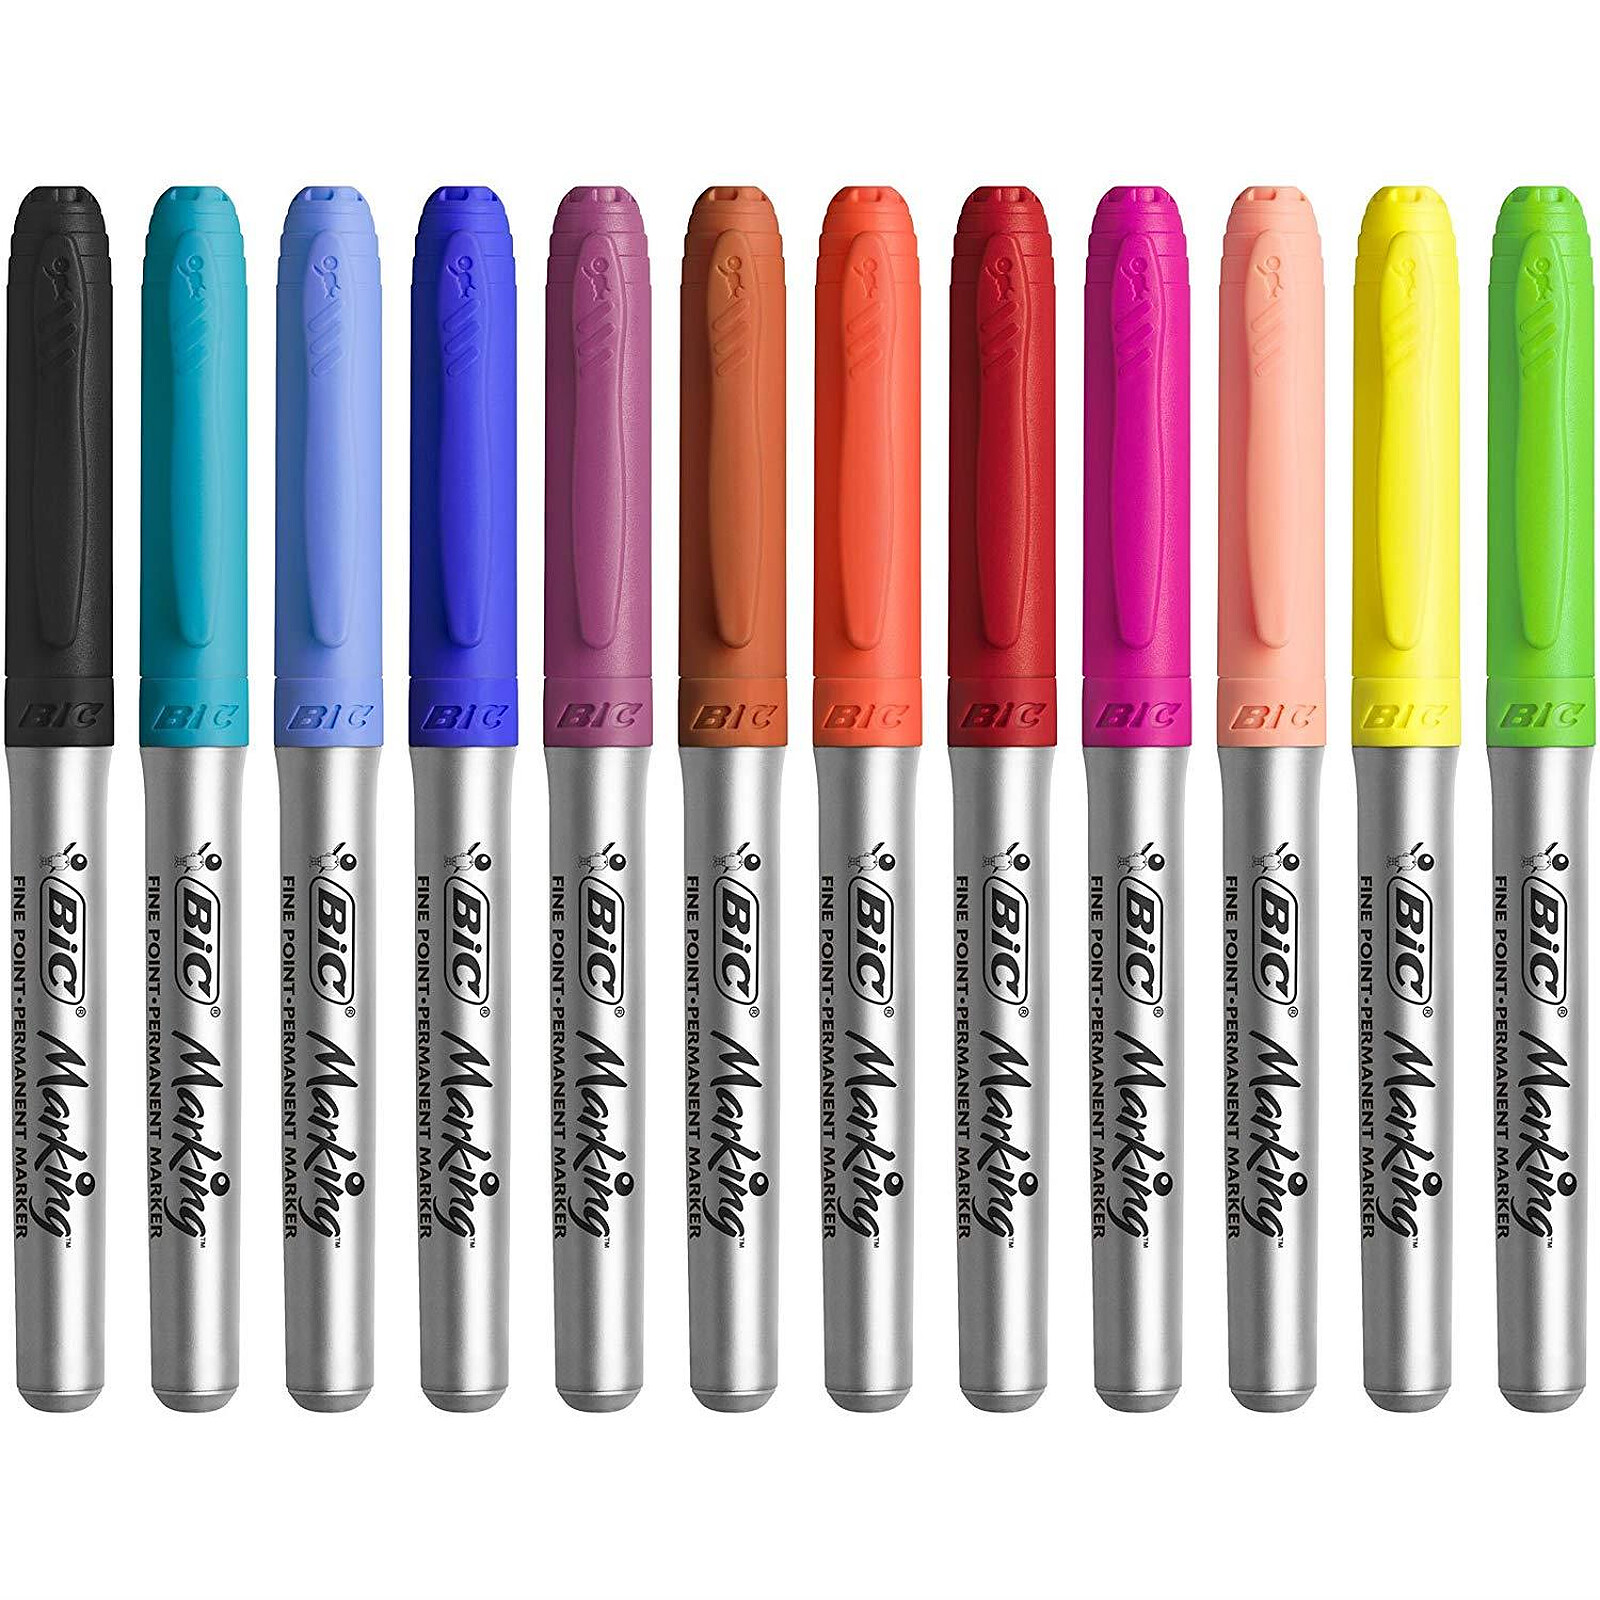 edding 3000 Permanent Marker - Black, Red, Blue, Green - Pack of 4 - Round  Tip 1.5-3 mm - Quick-Drying Permanent Markers - Waterproof, Smudge-Proof 